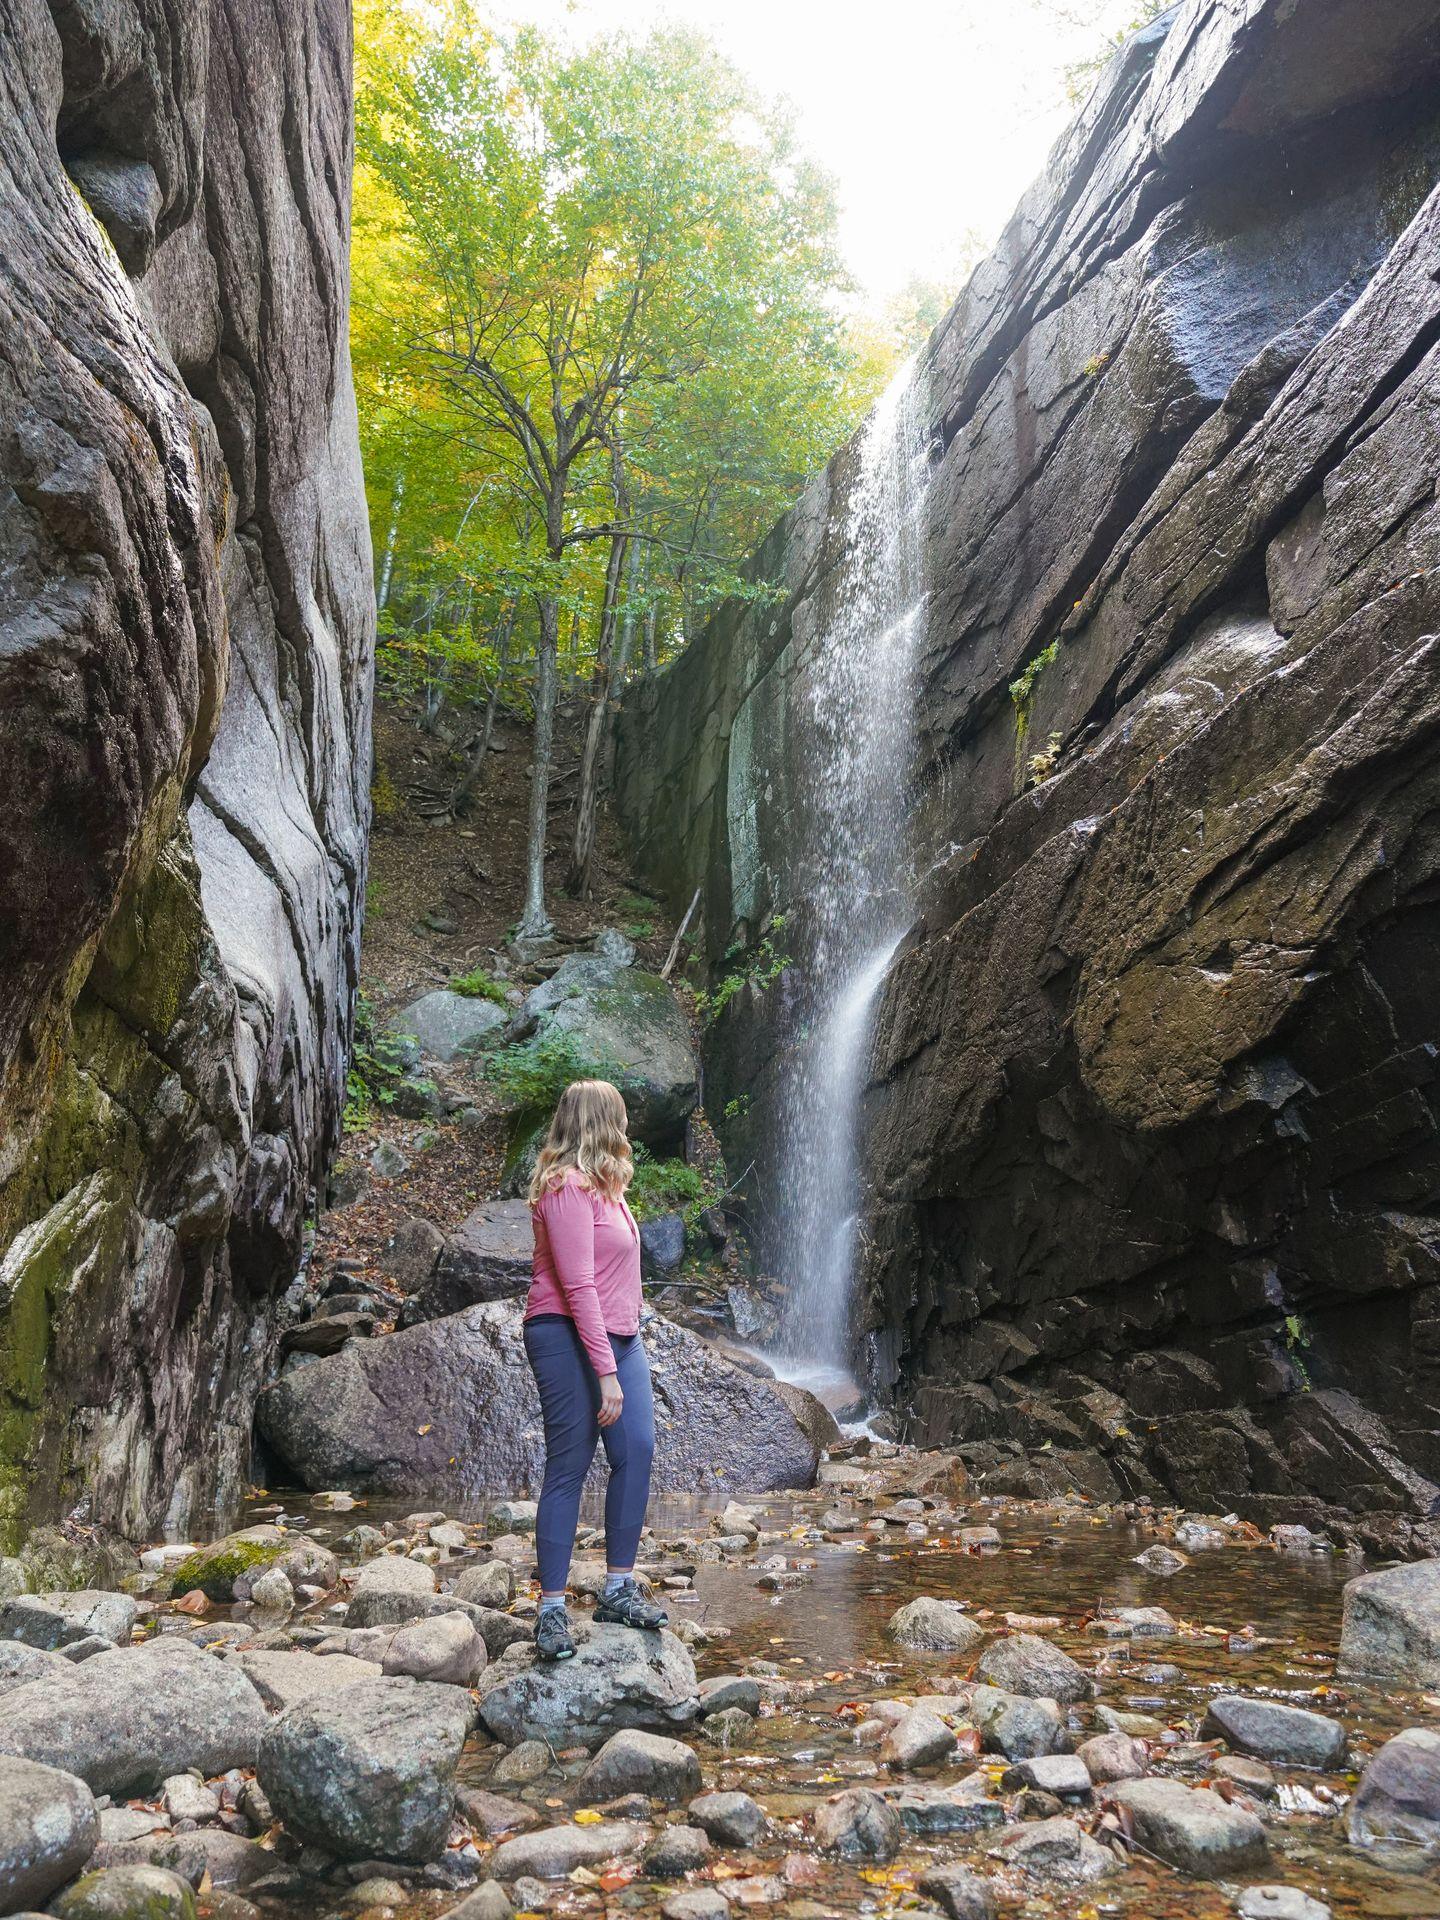 Lydia standing between two tall, flat rock cliffs. A waterfall flows over the side of one of the rocks.